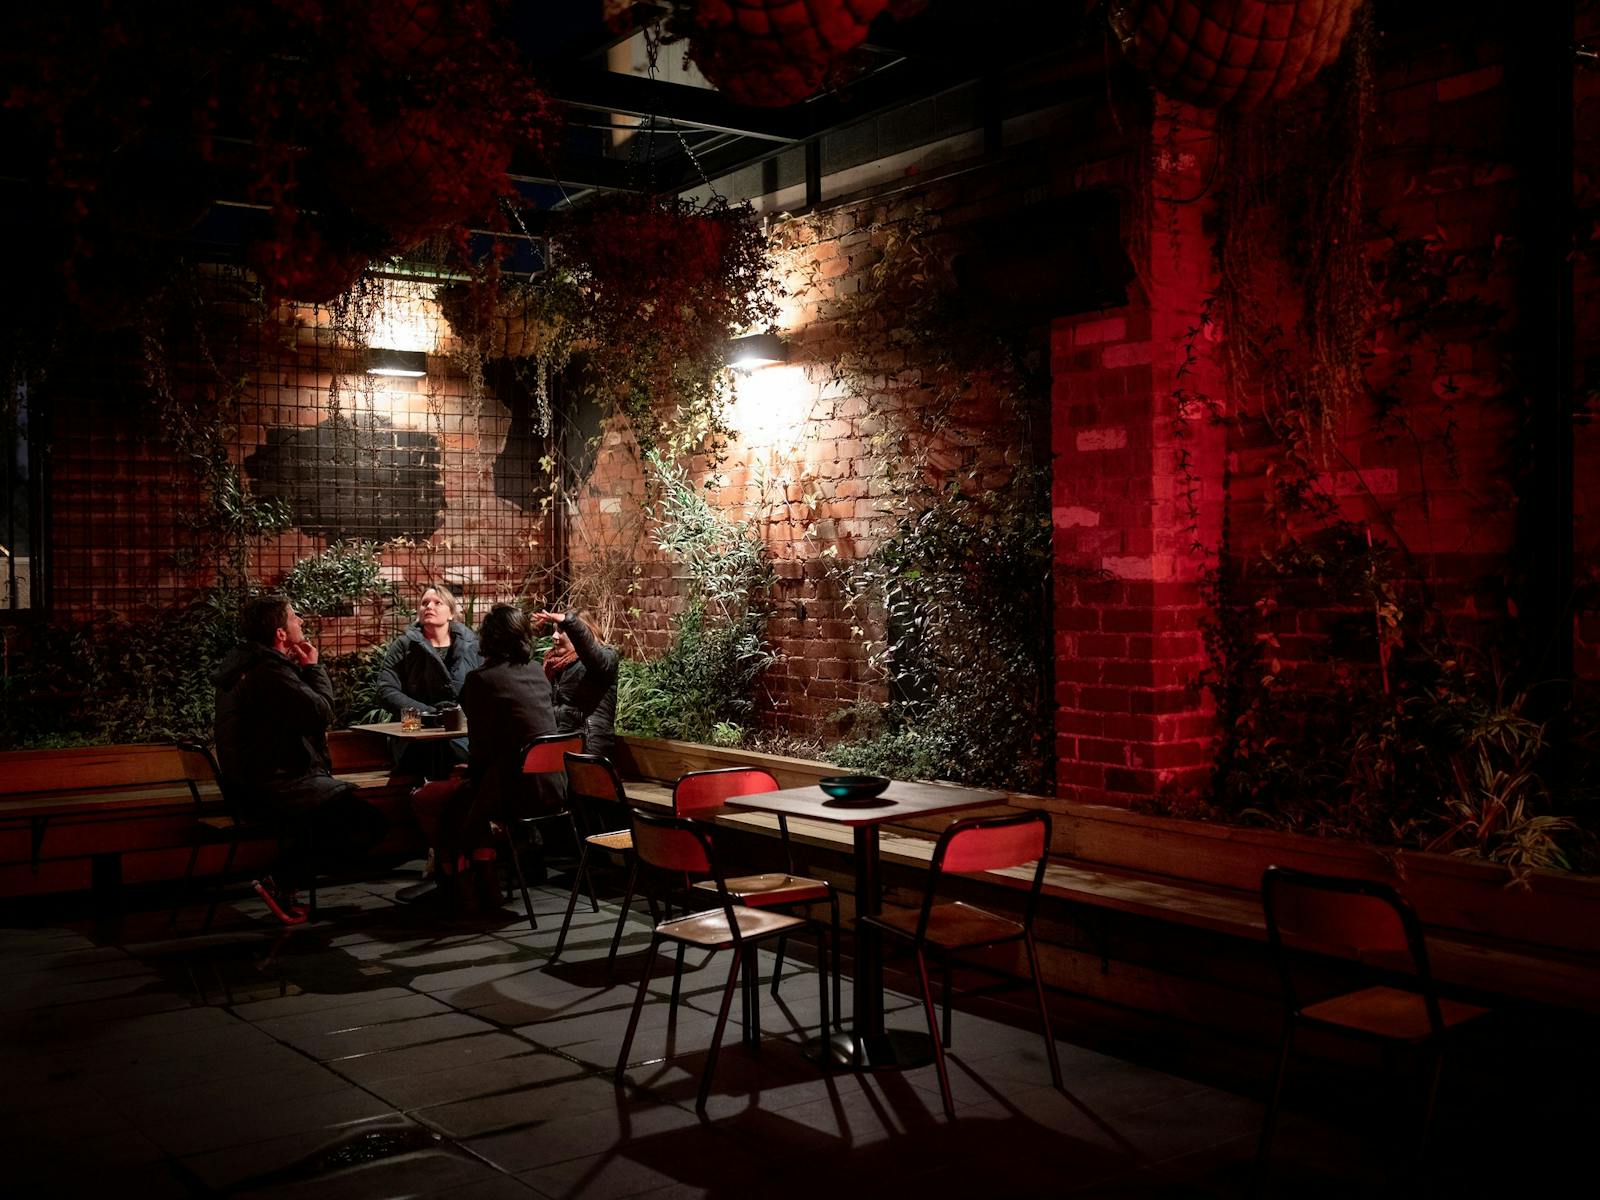 People seated at tables in an enclosed beer garden courtyard smile and laugh under red lighting